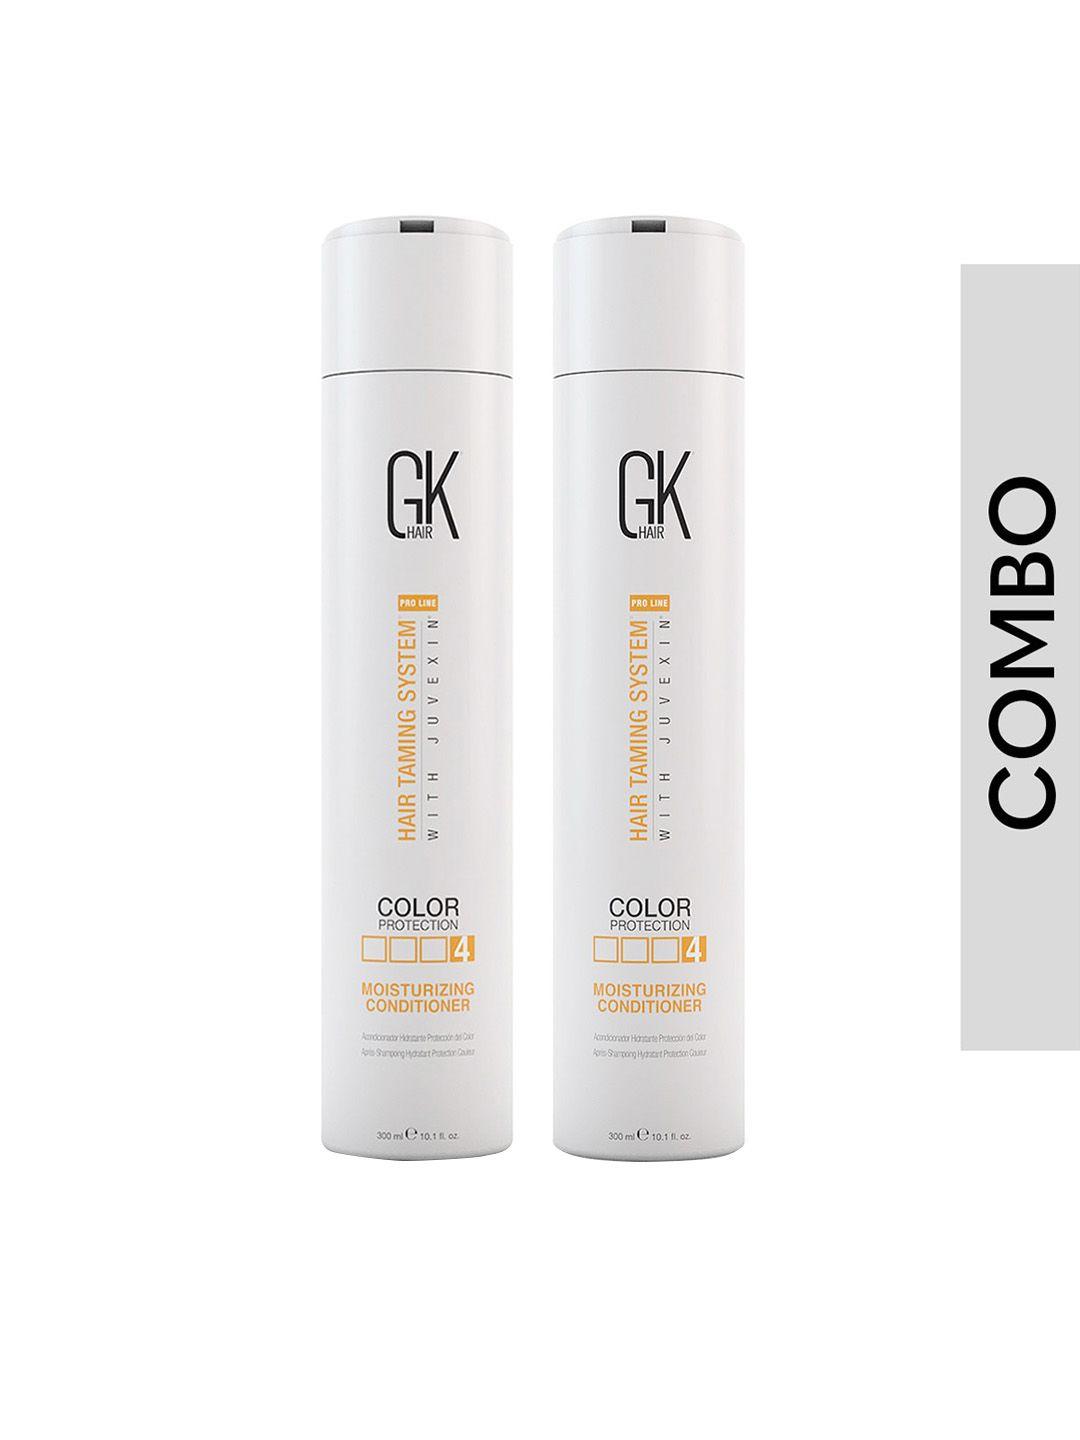 gk-hair-set-of-2-hair-taming-system-moisturizing-conditioner-with-juvenix---300-ml-each